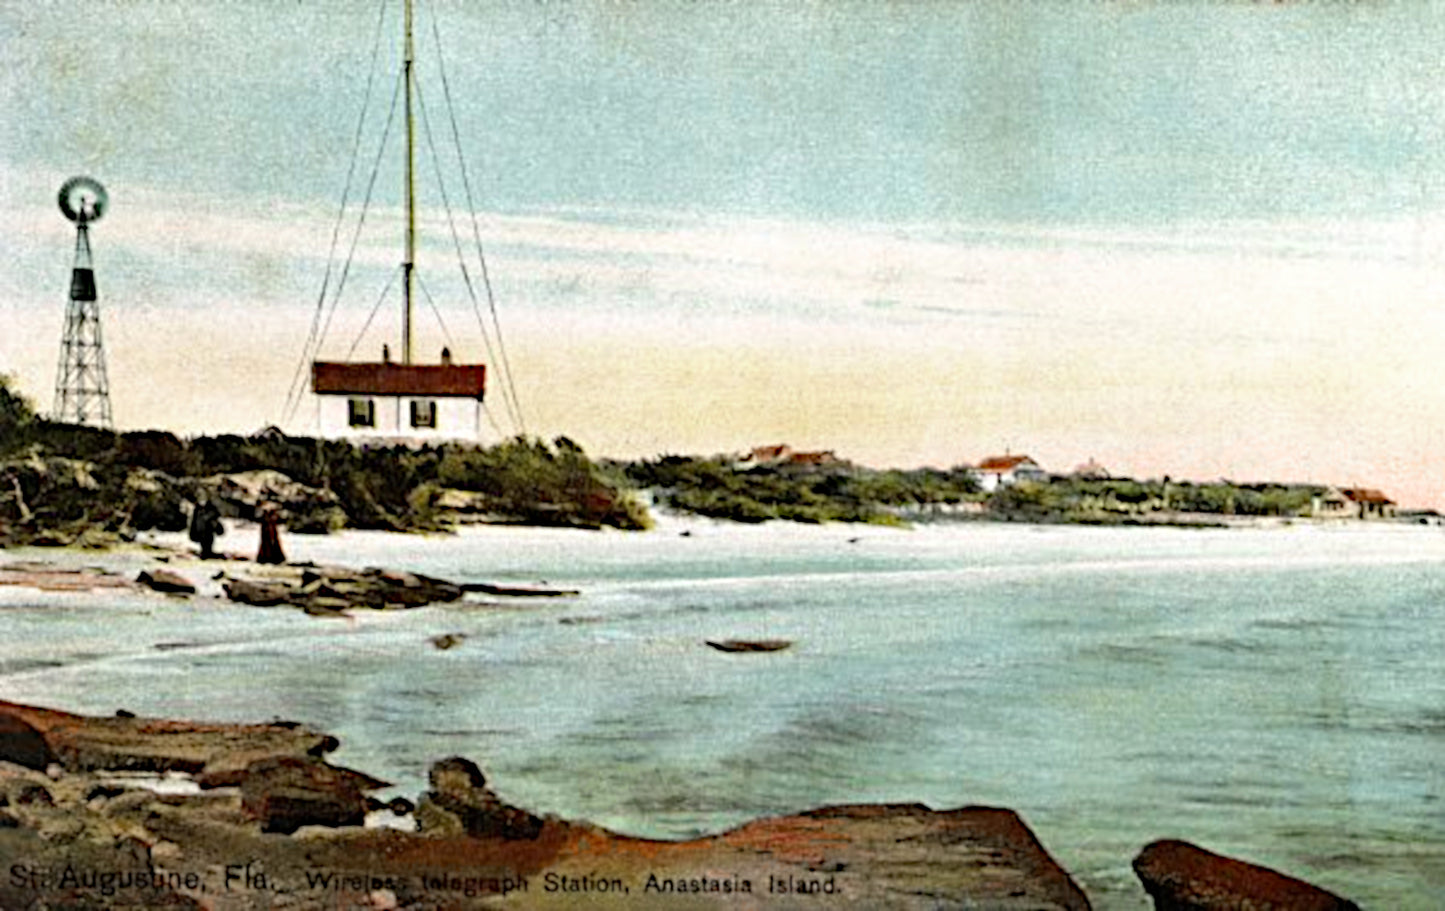 An old postcard from St. Augustine from the area of the lighthouse but showing the old wireless telegraph station.